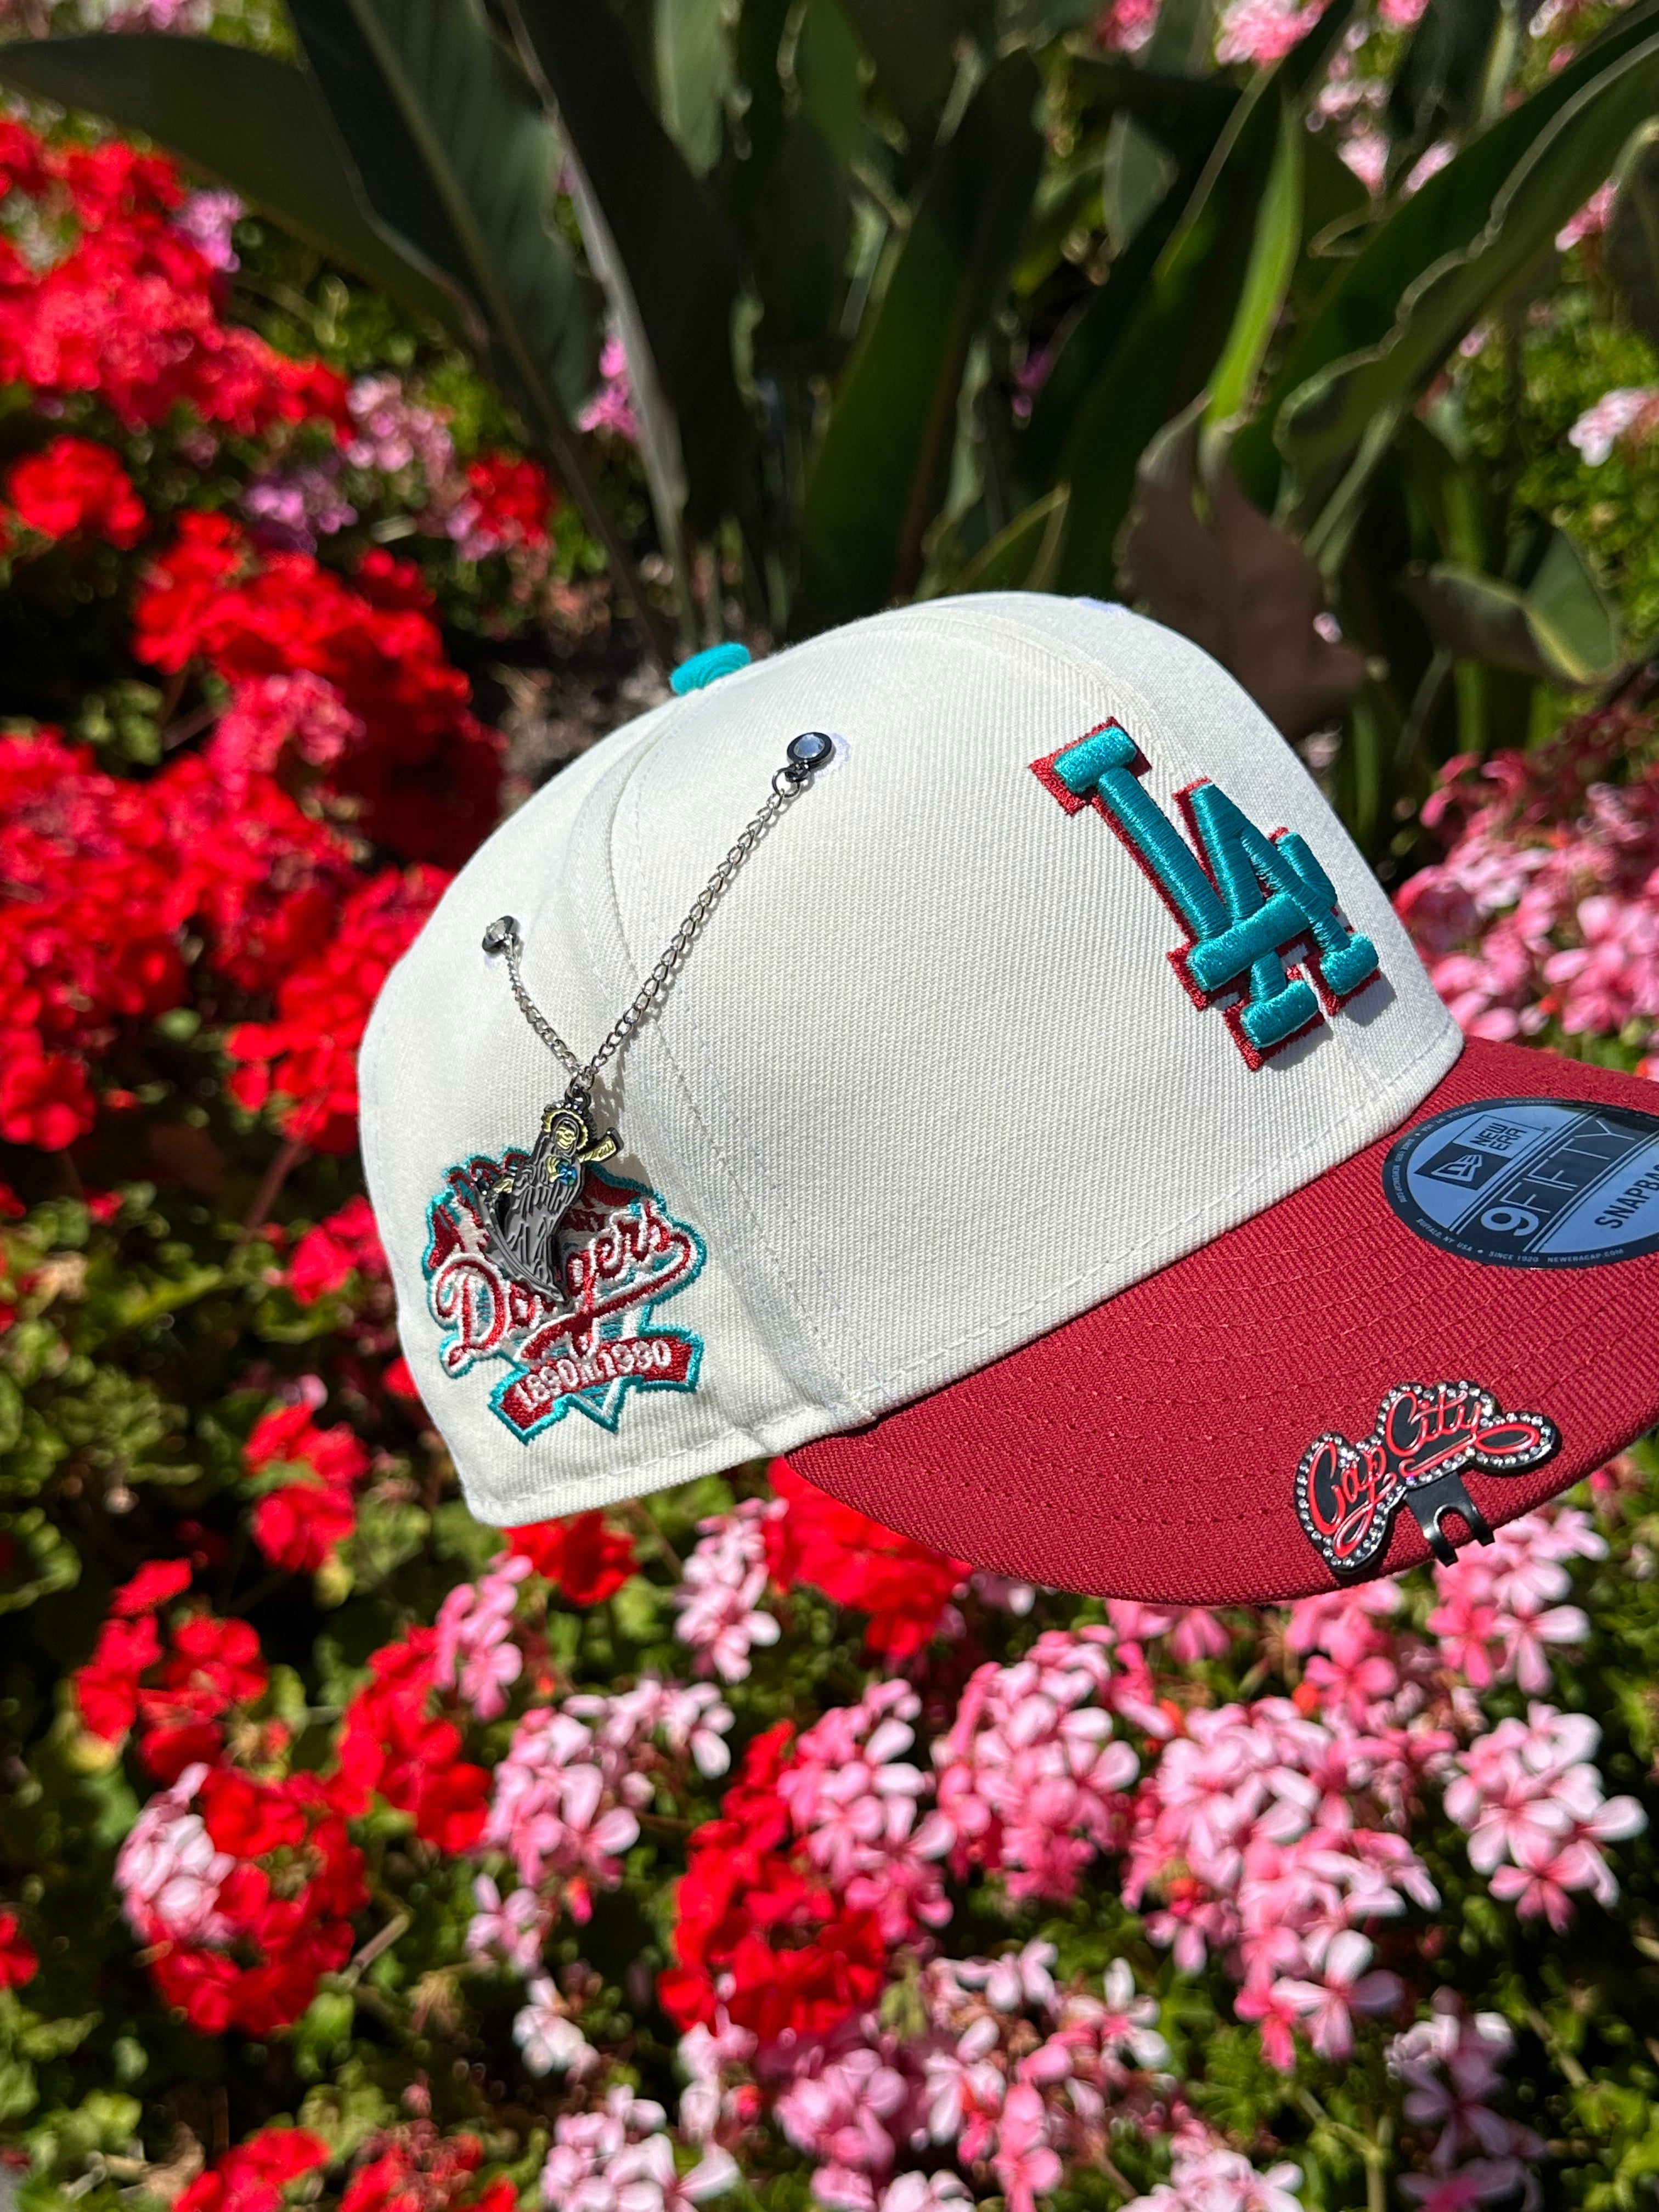 NEW ERA EXCLUSIVE 9FIFTY CHROME WHITE/BURGUNDY LOS ANGELES DODGERS SNAPBACK W/ 100TH ANNIVERSARY SIDE PATCH